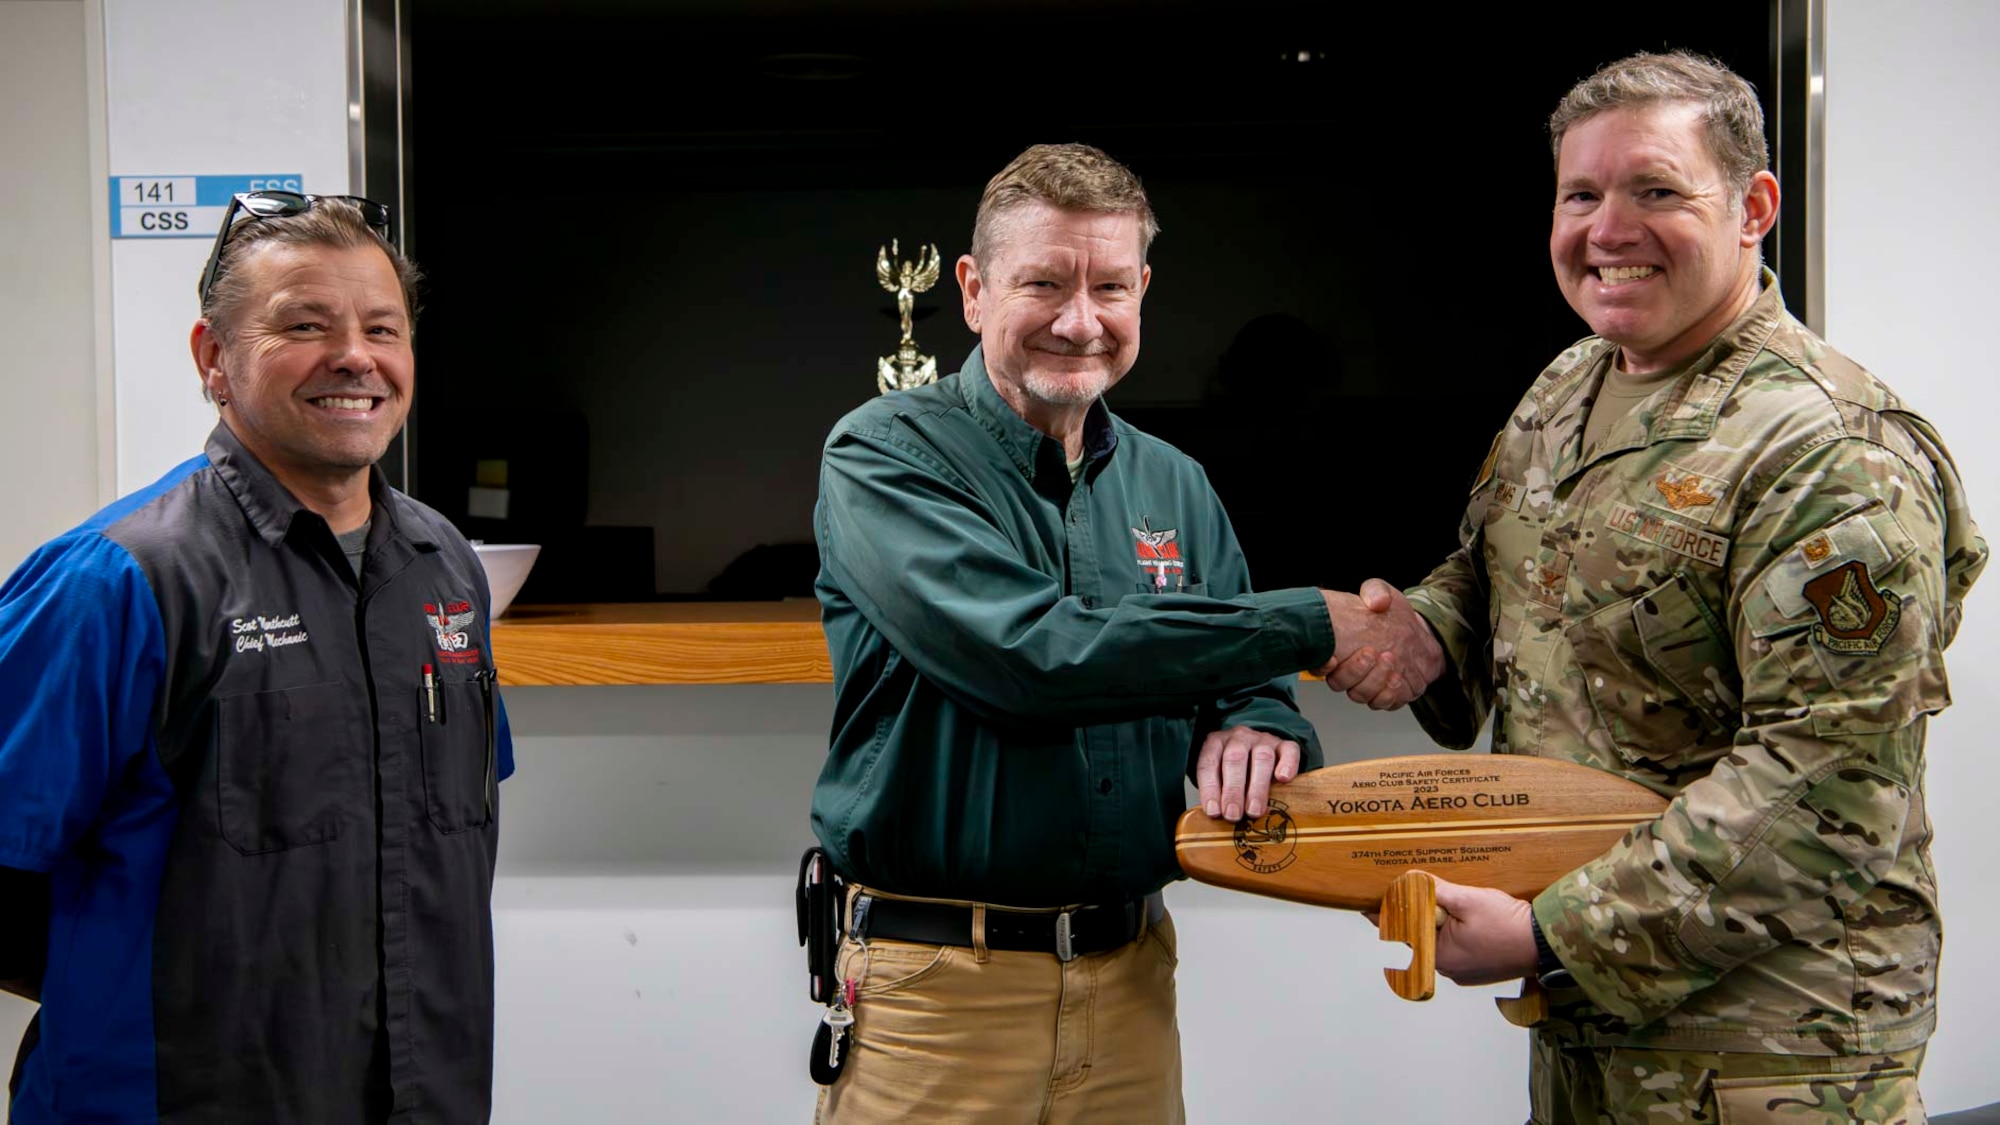 Two men receive an award from a military member.